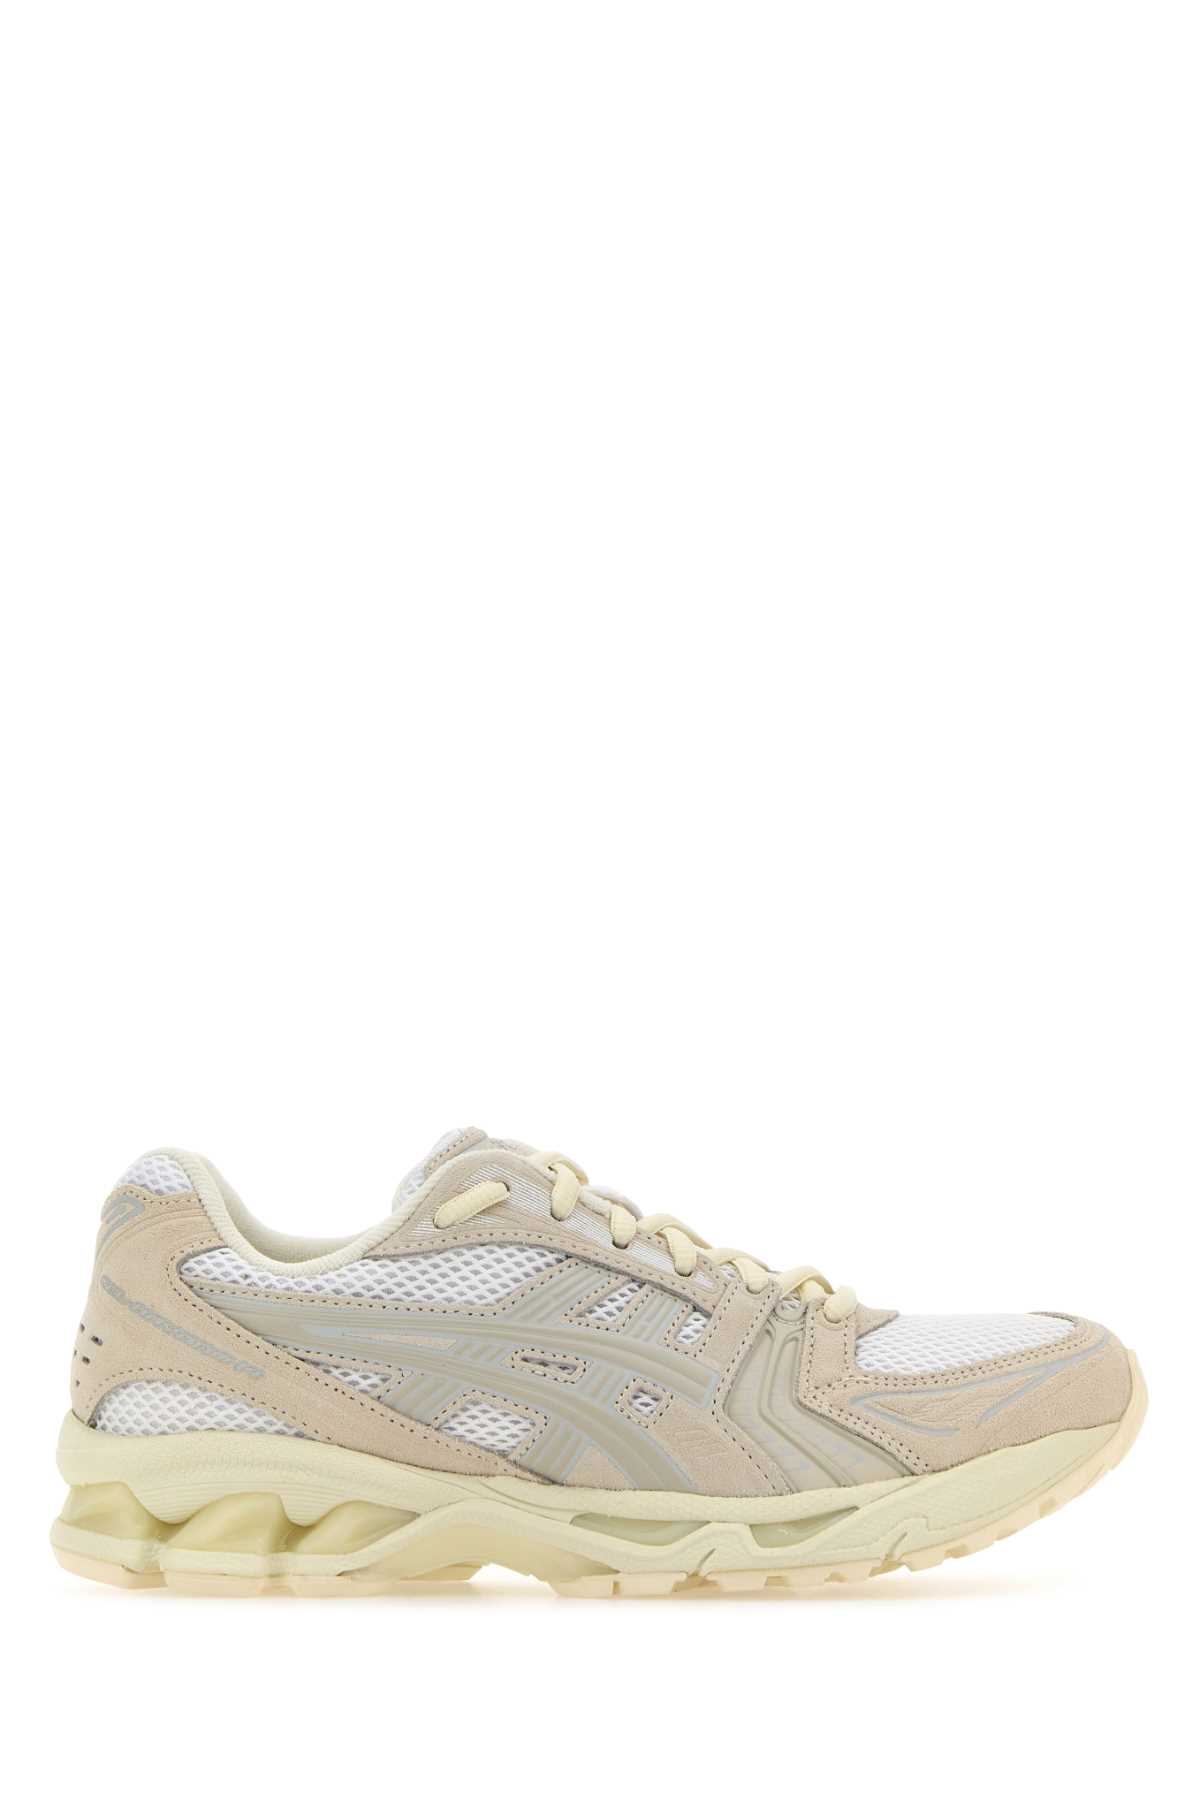 Two-tone Mesh And Suede Gel-kayano 14 Sneakers